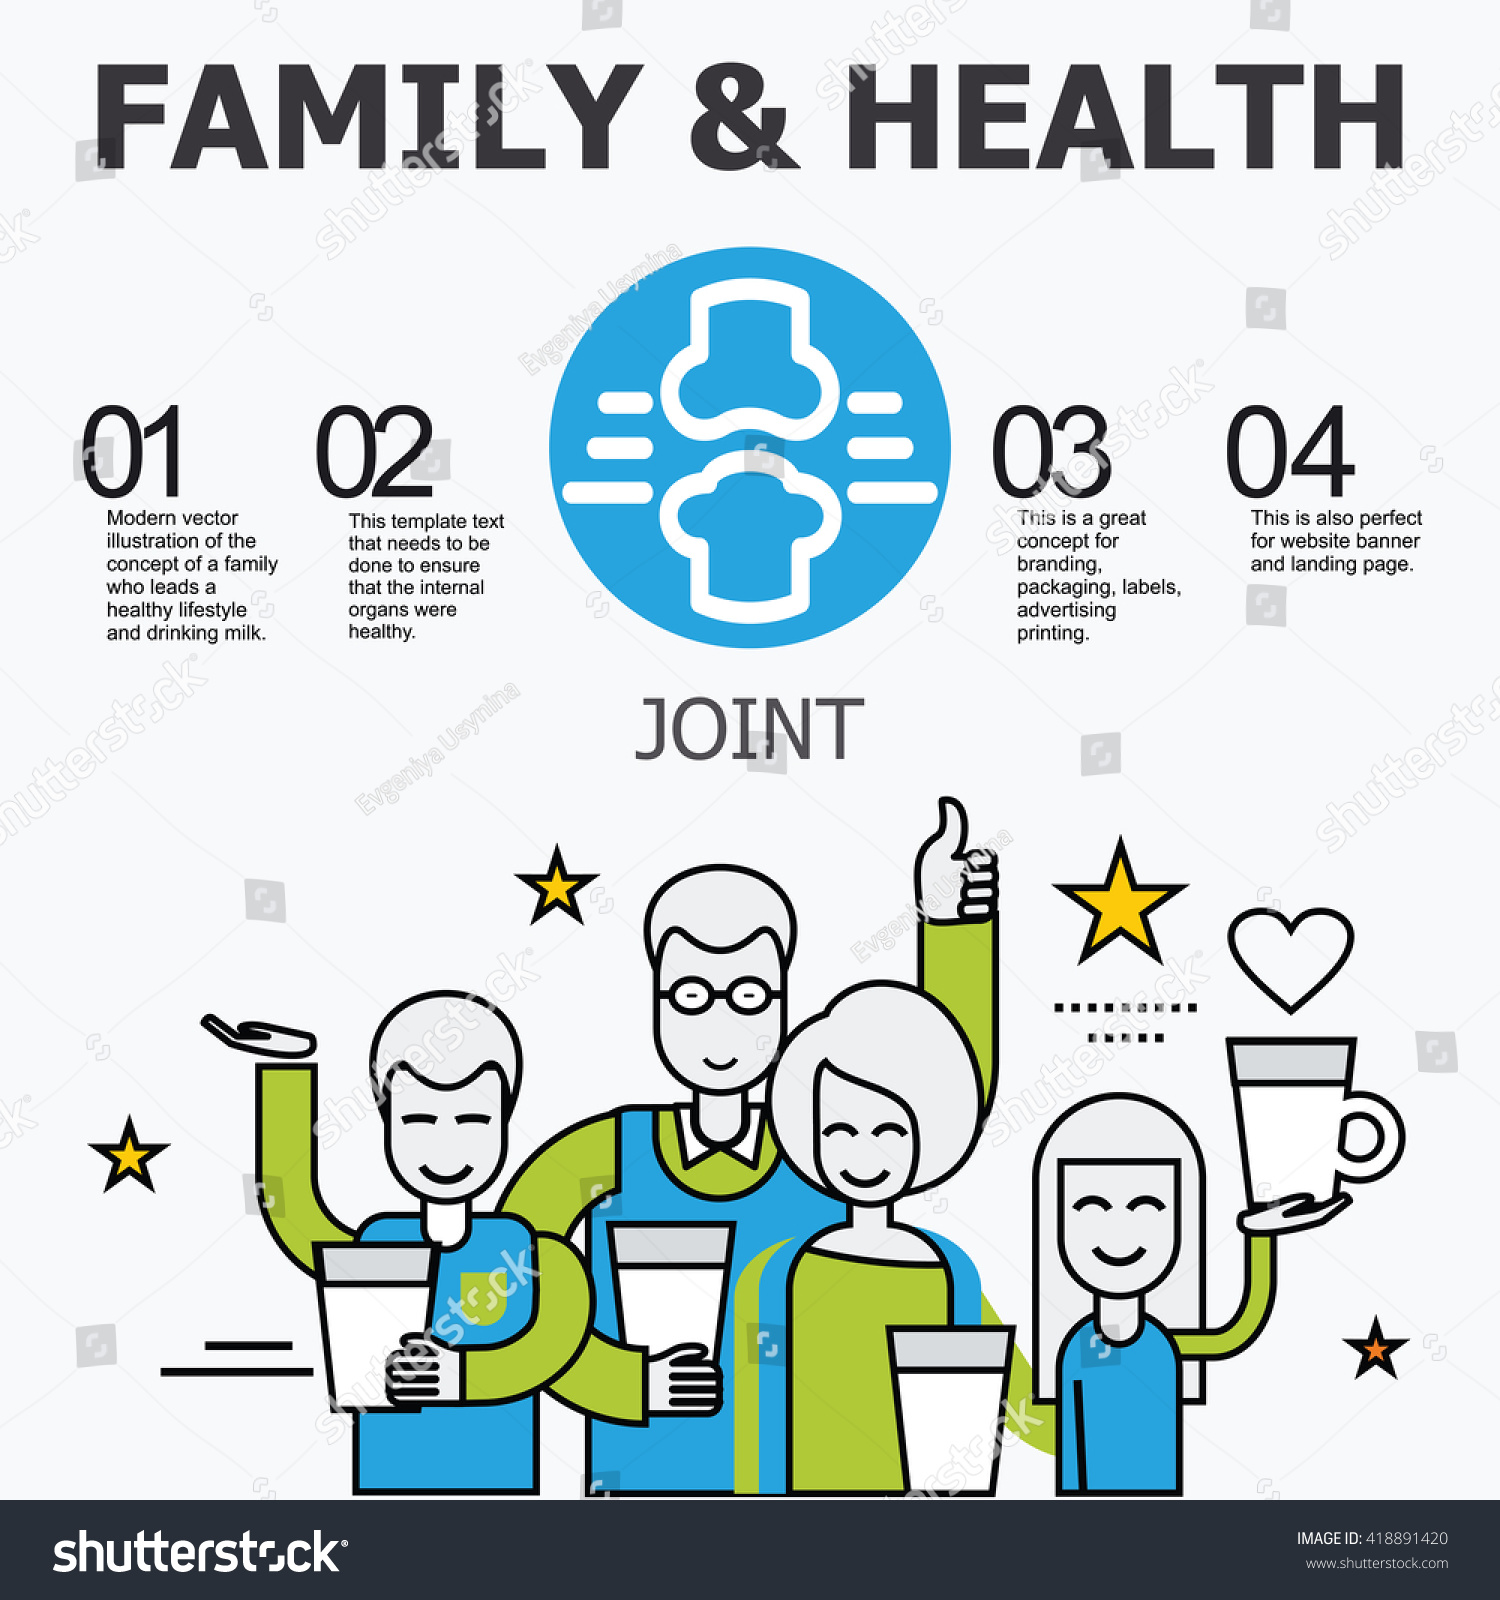 joint family clipart images - photo #40